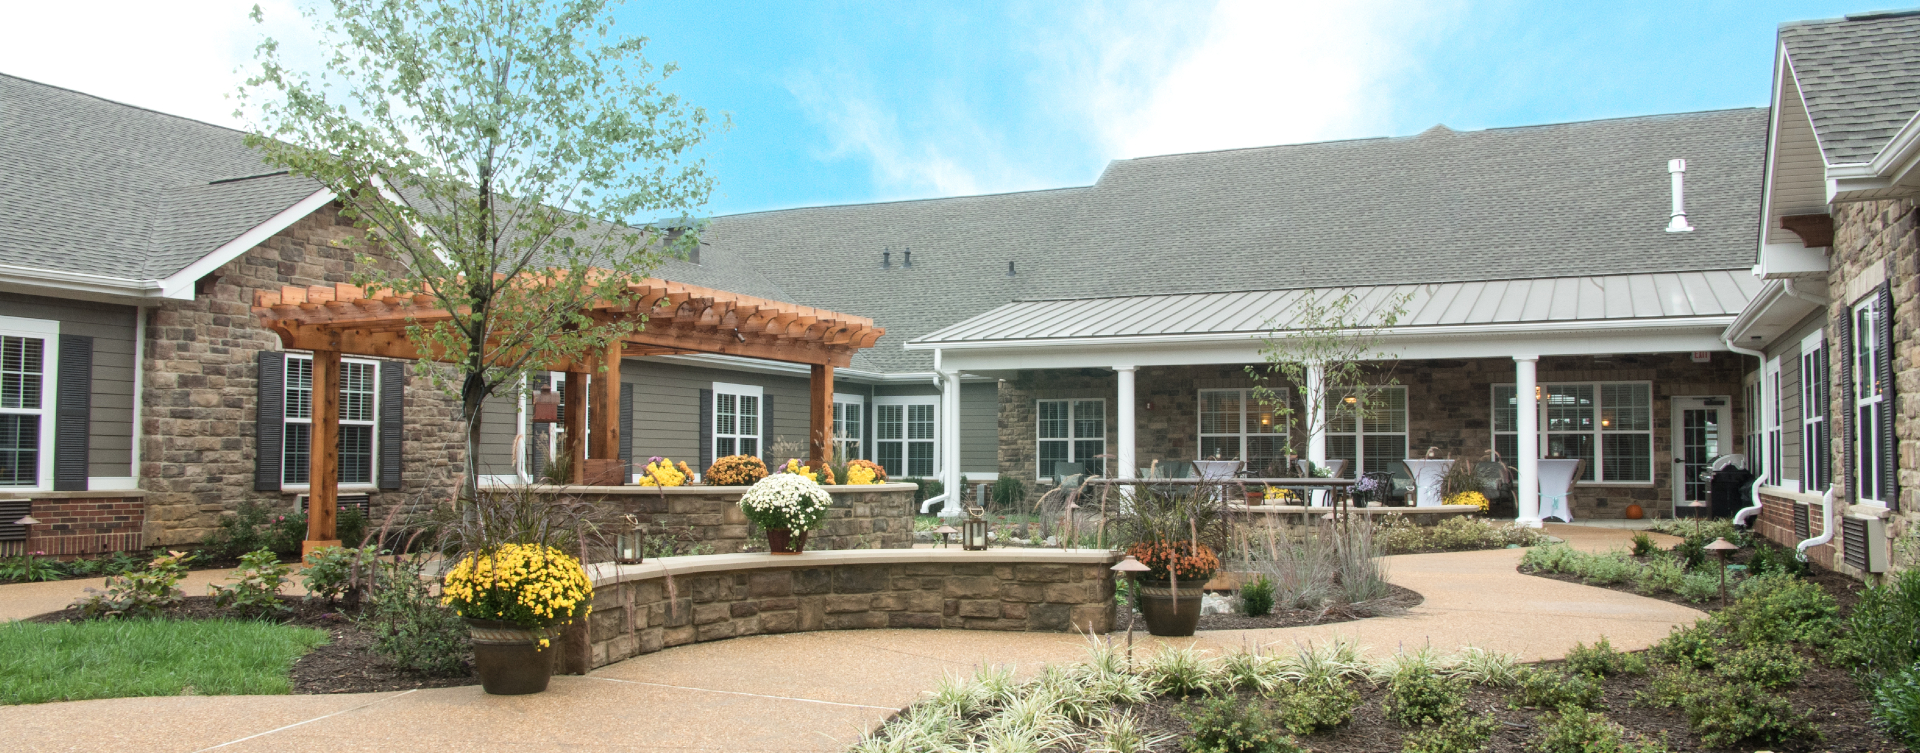 Enjoy the outdoors in a whole new light by stepping into our secure courtyard at Bickford of Spotsylvania